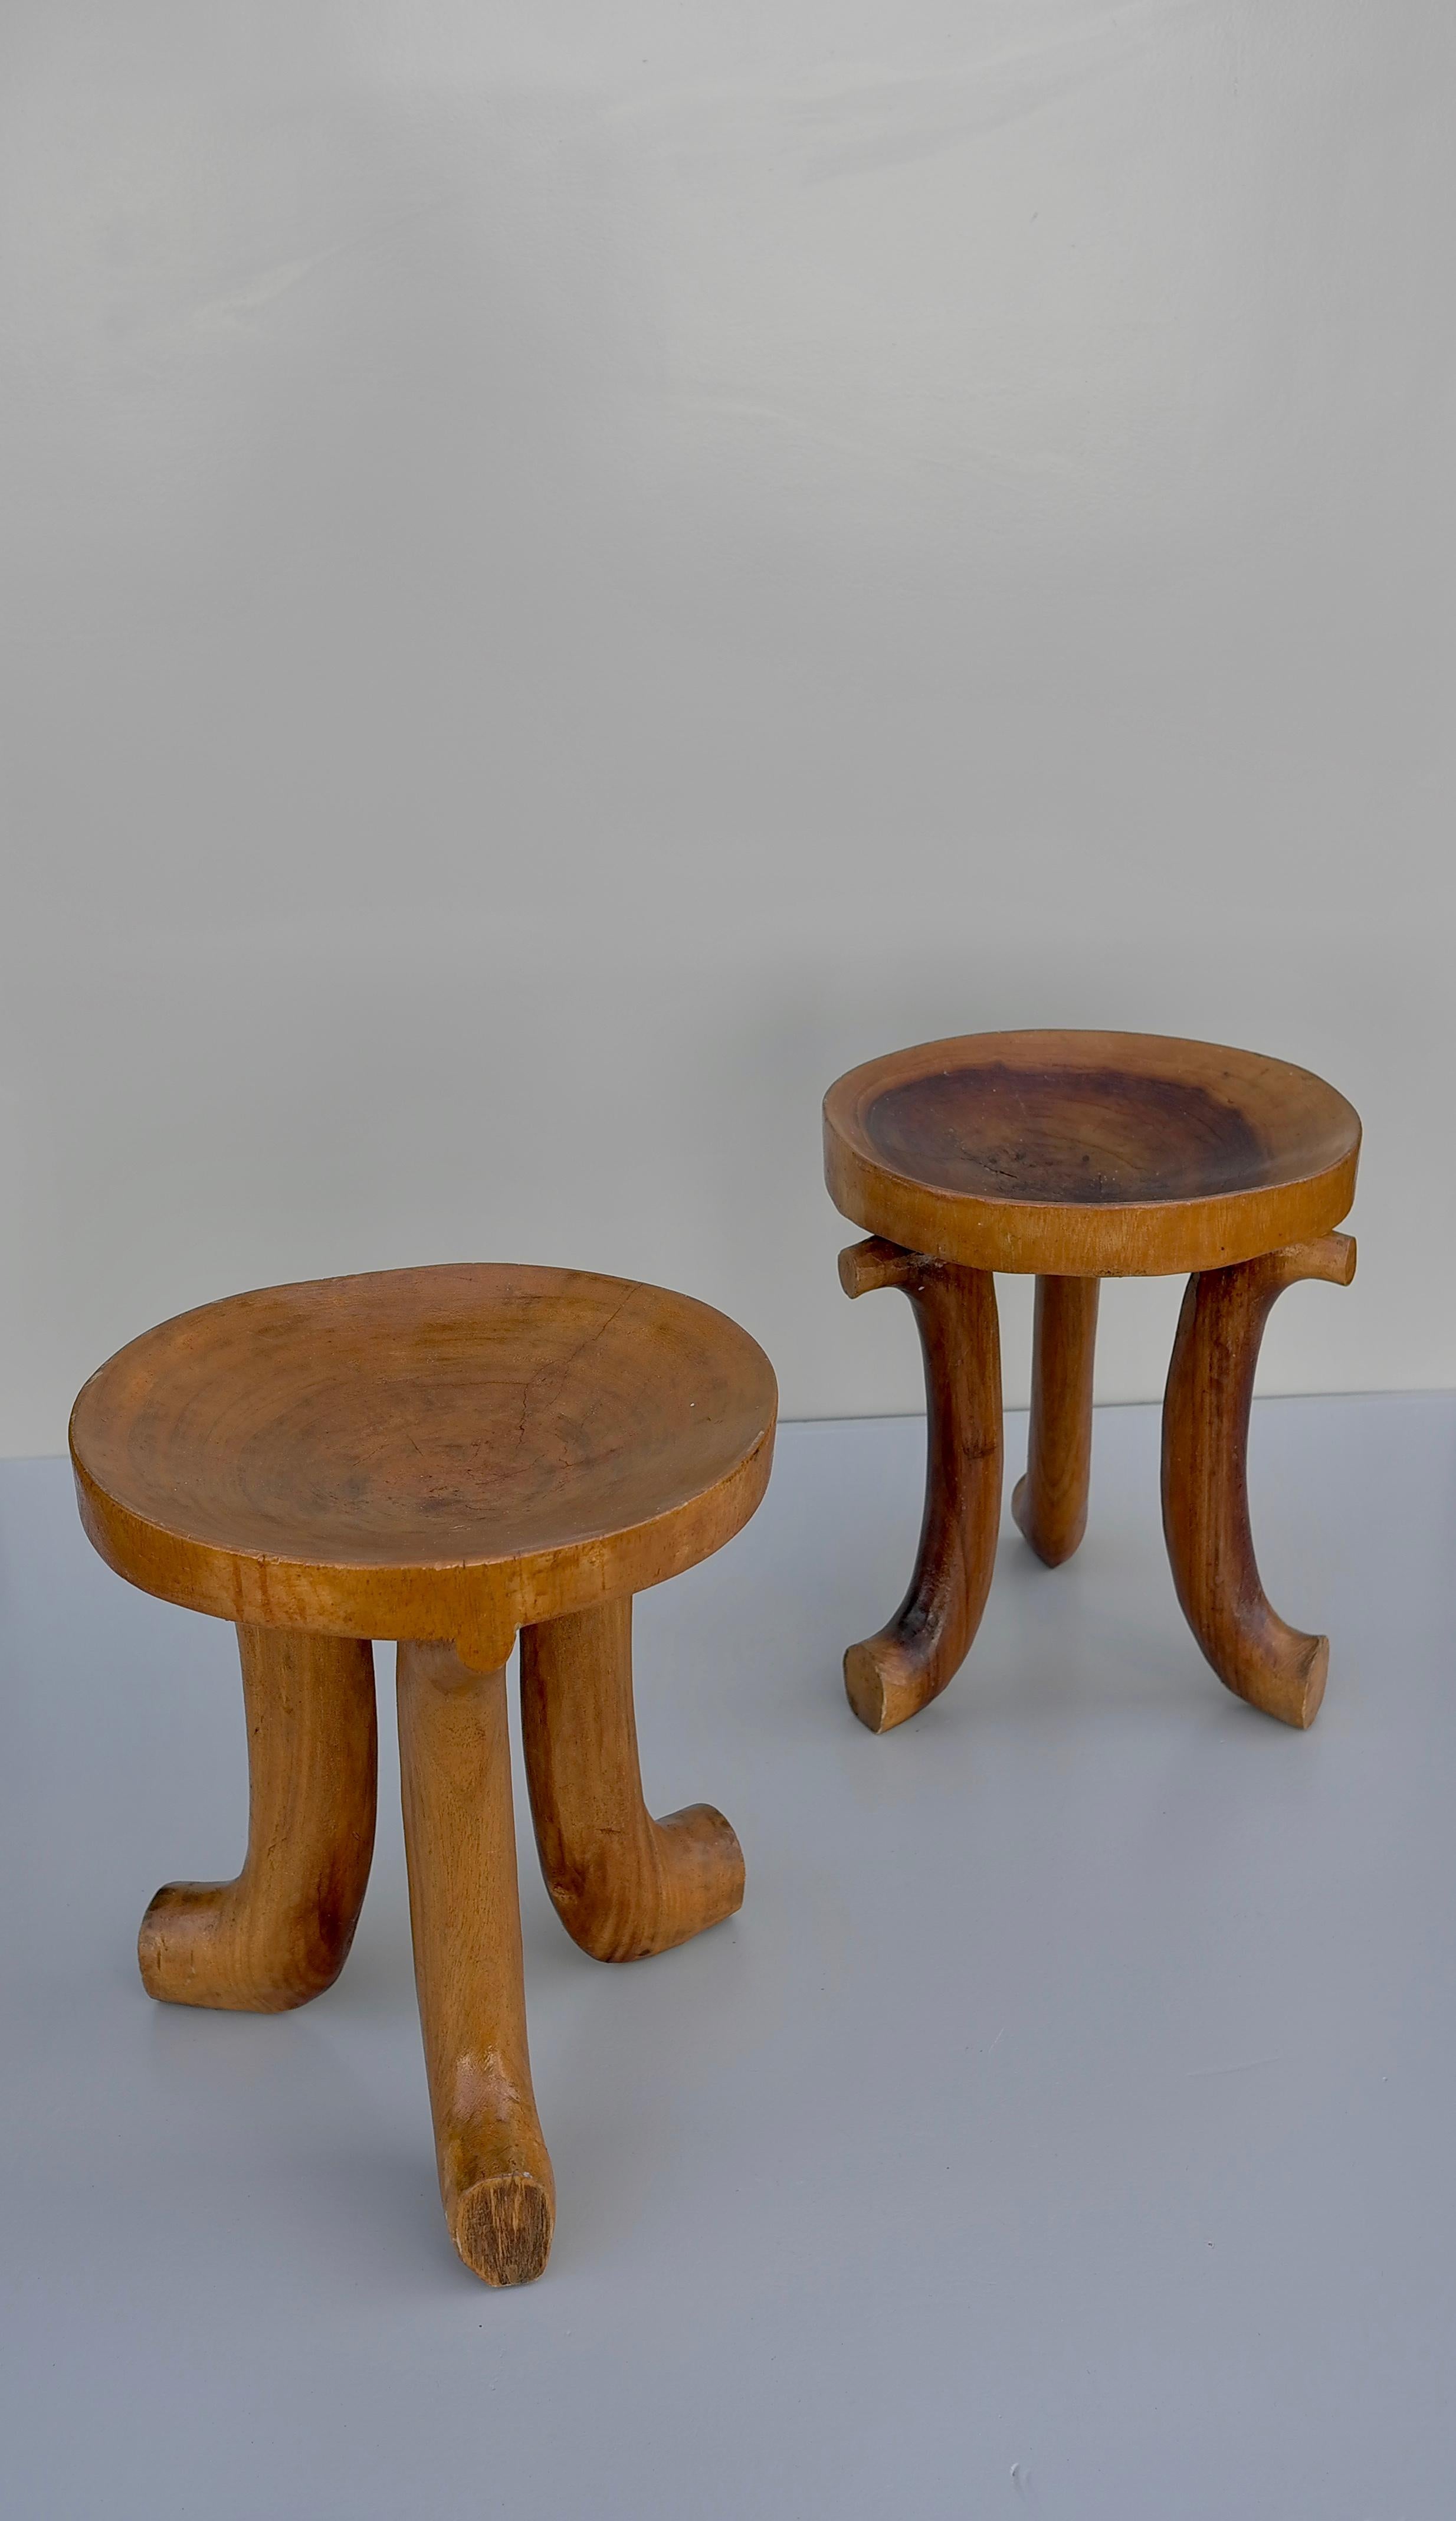 A wonderfully pair of sculptural early 20th century Ethiopian Gurage Stools carved of one piece of wood showing a hand carved texture, with three curved legs supporting a convex bowl-form seat with a beautiful patina.